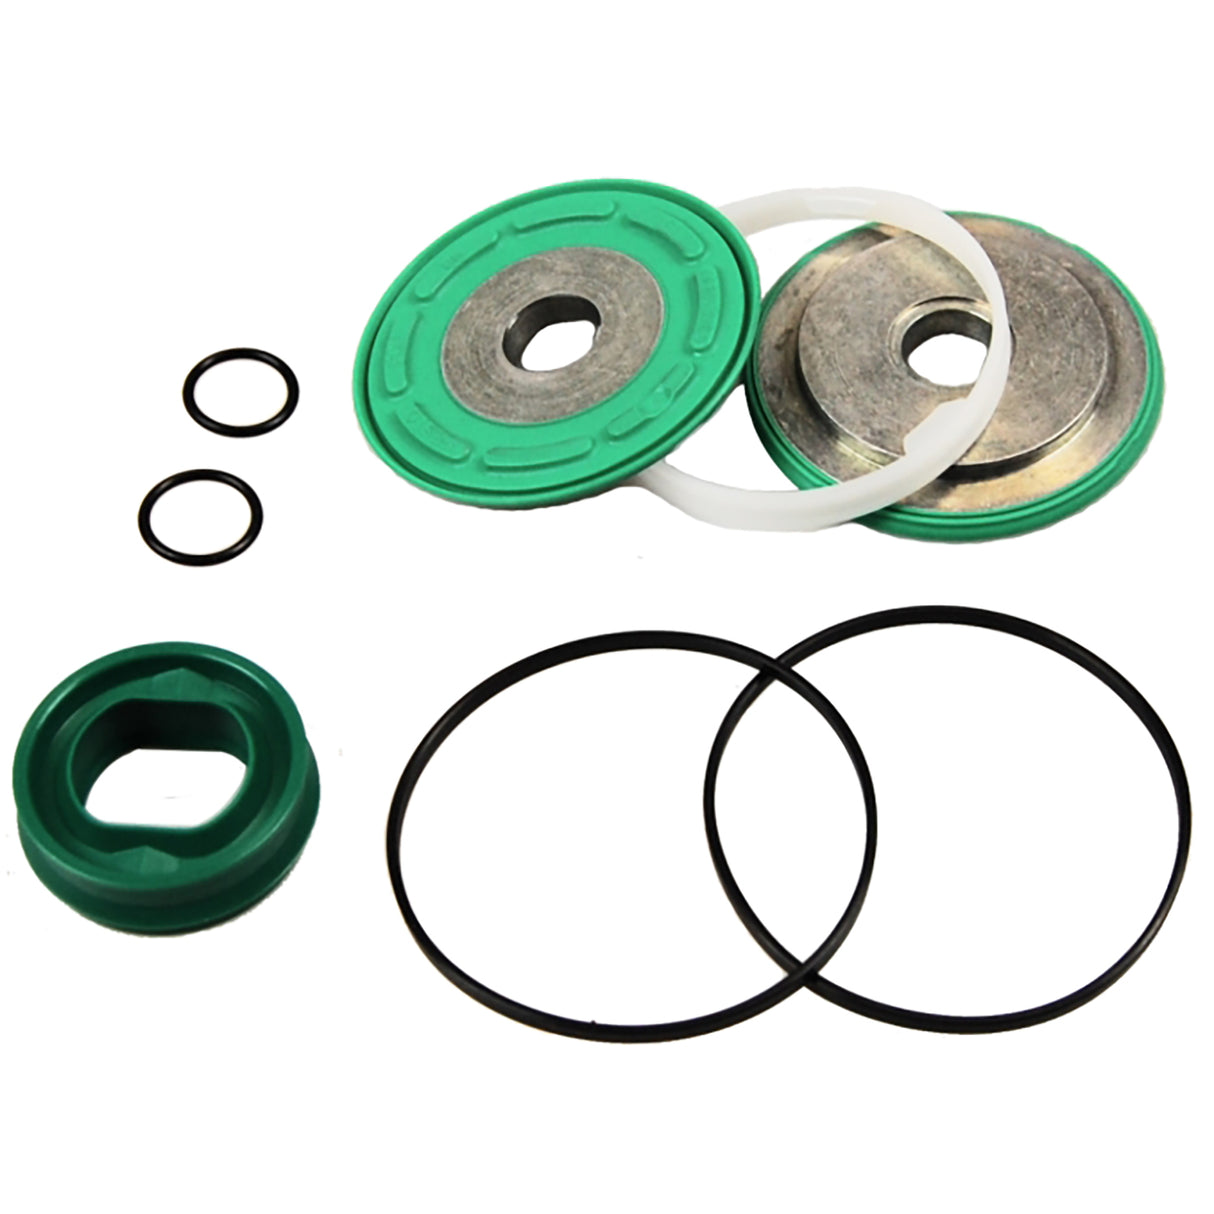 Z-cylinder repair kit Lely A3 and Lely A4